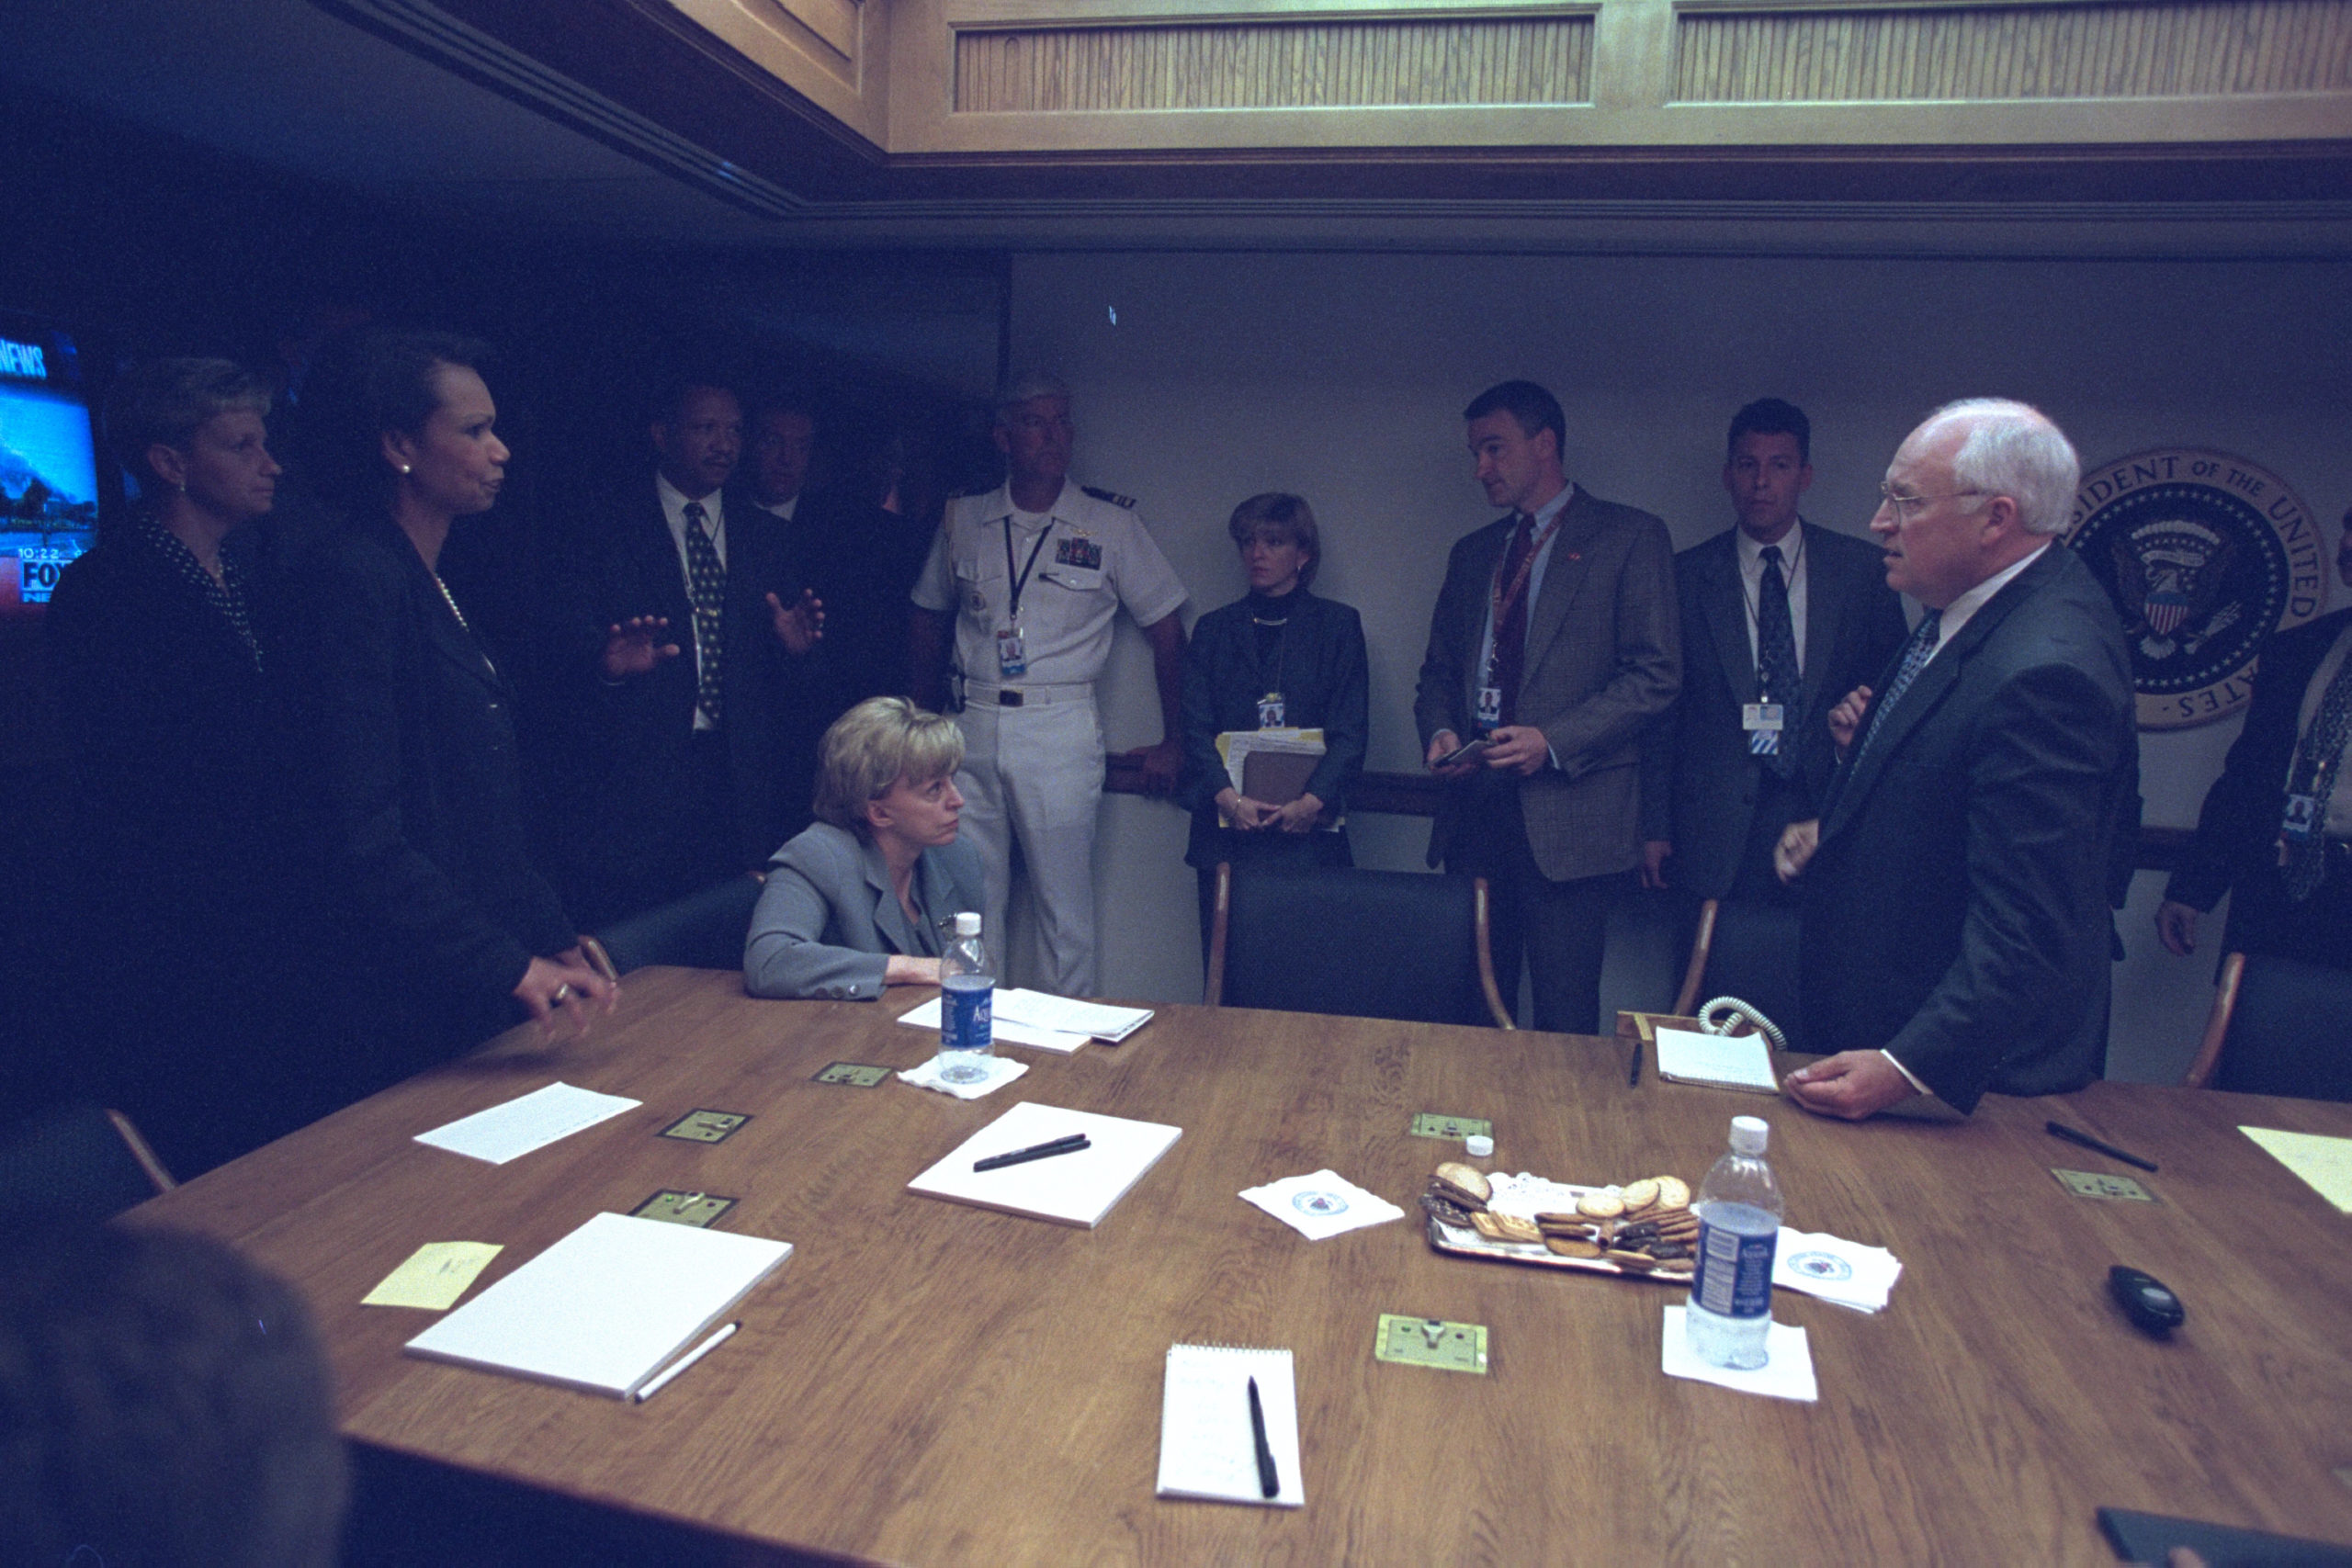 The Presidential Emergency Operations Centre on September 11, 2001 (Photo: U.S. National Archives/Flickr)